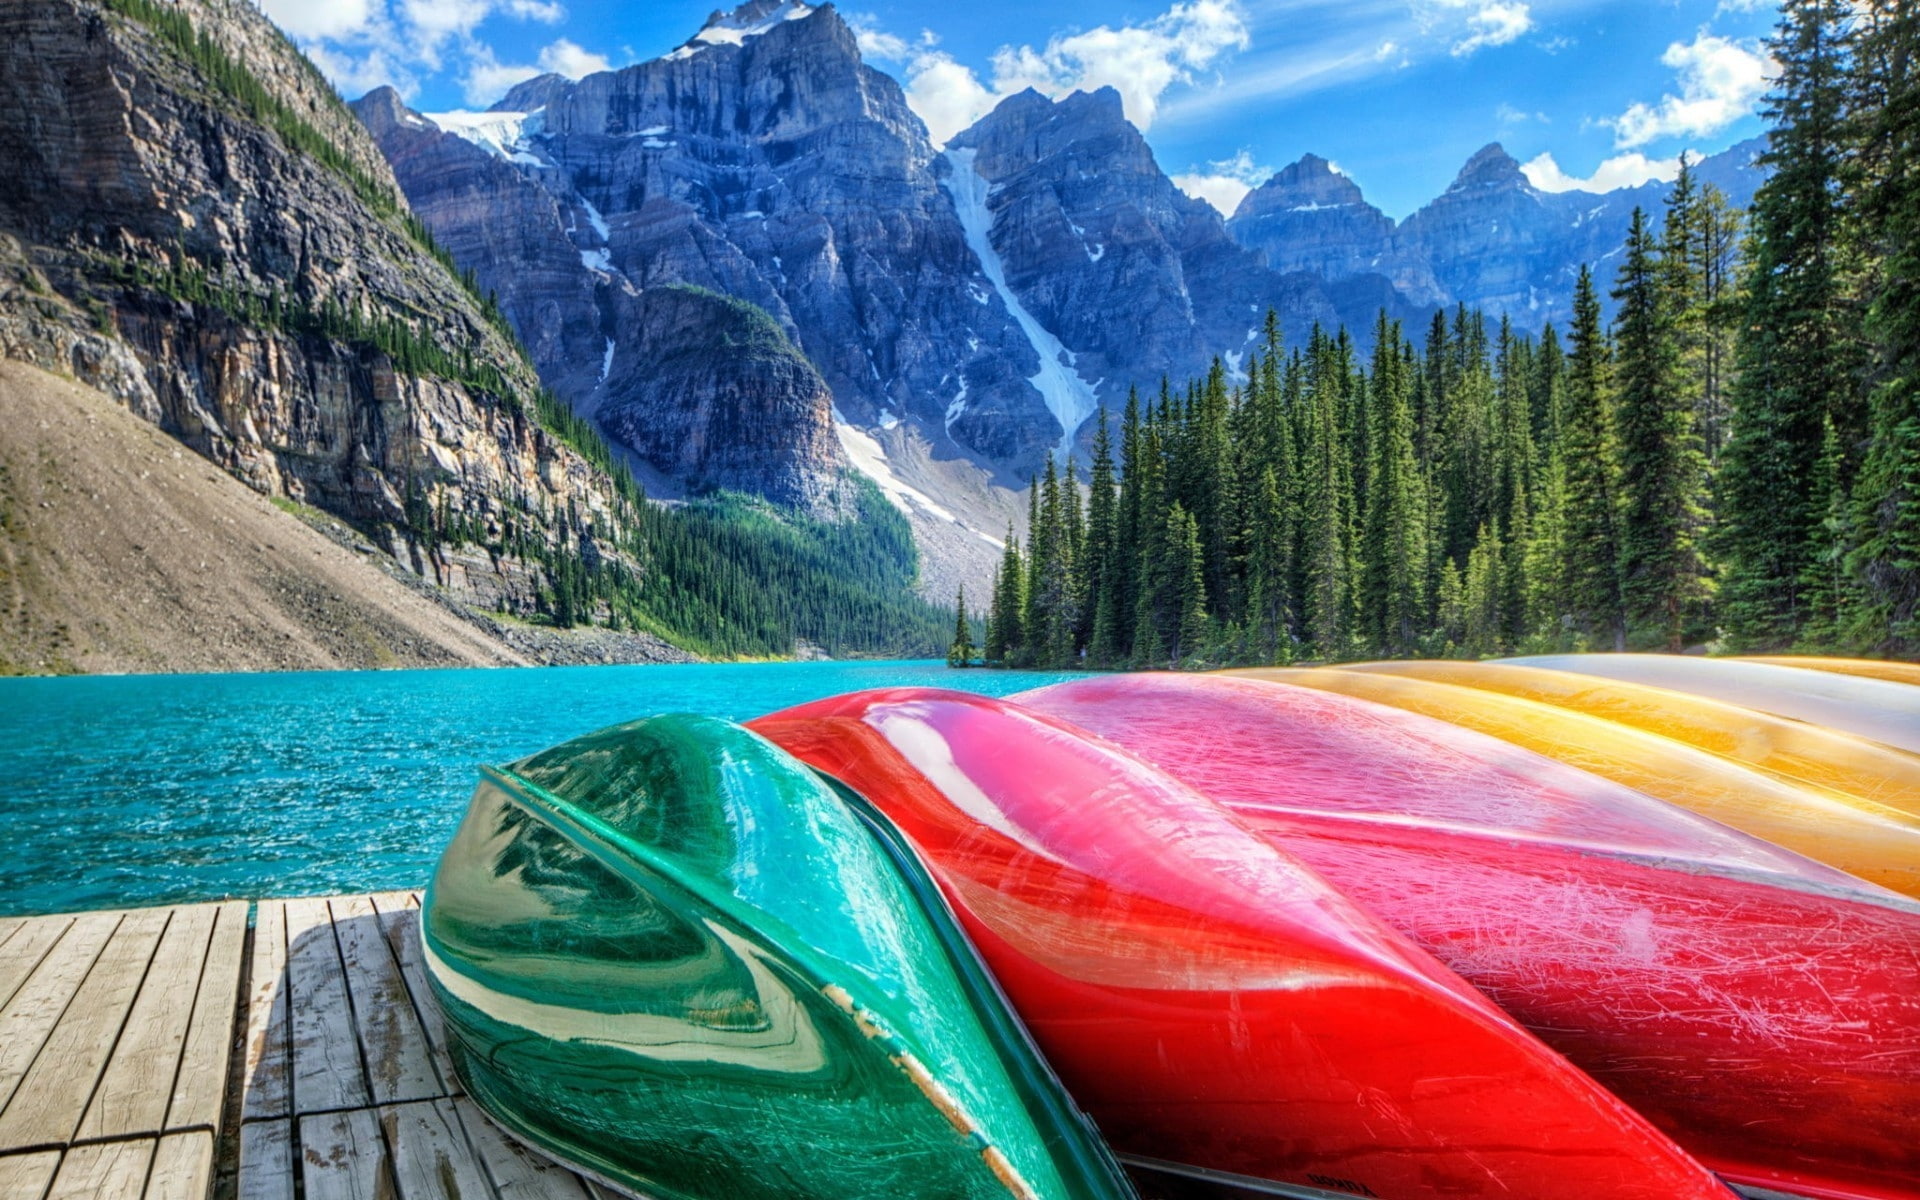 Mounatin Lake View, assorted color boats, canada, mountains, landscape